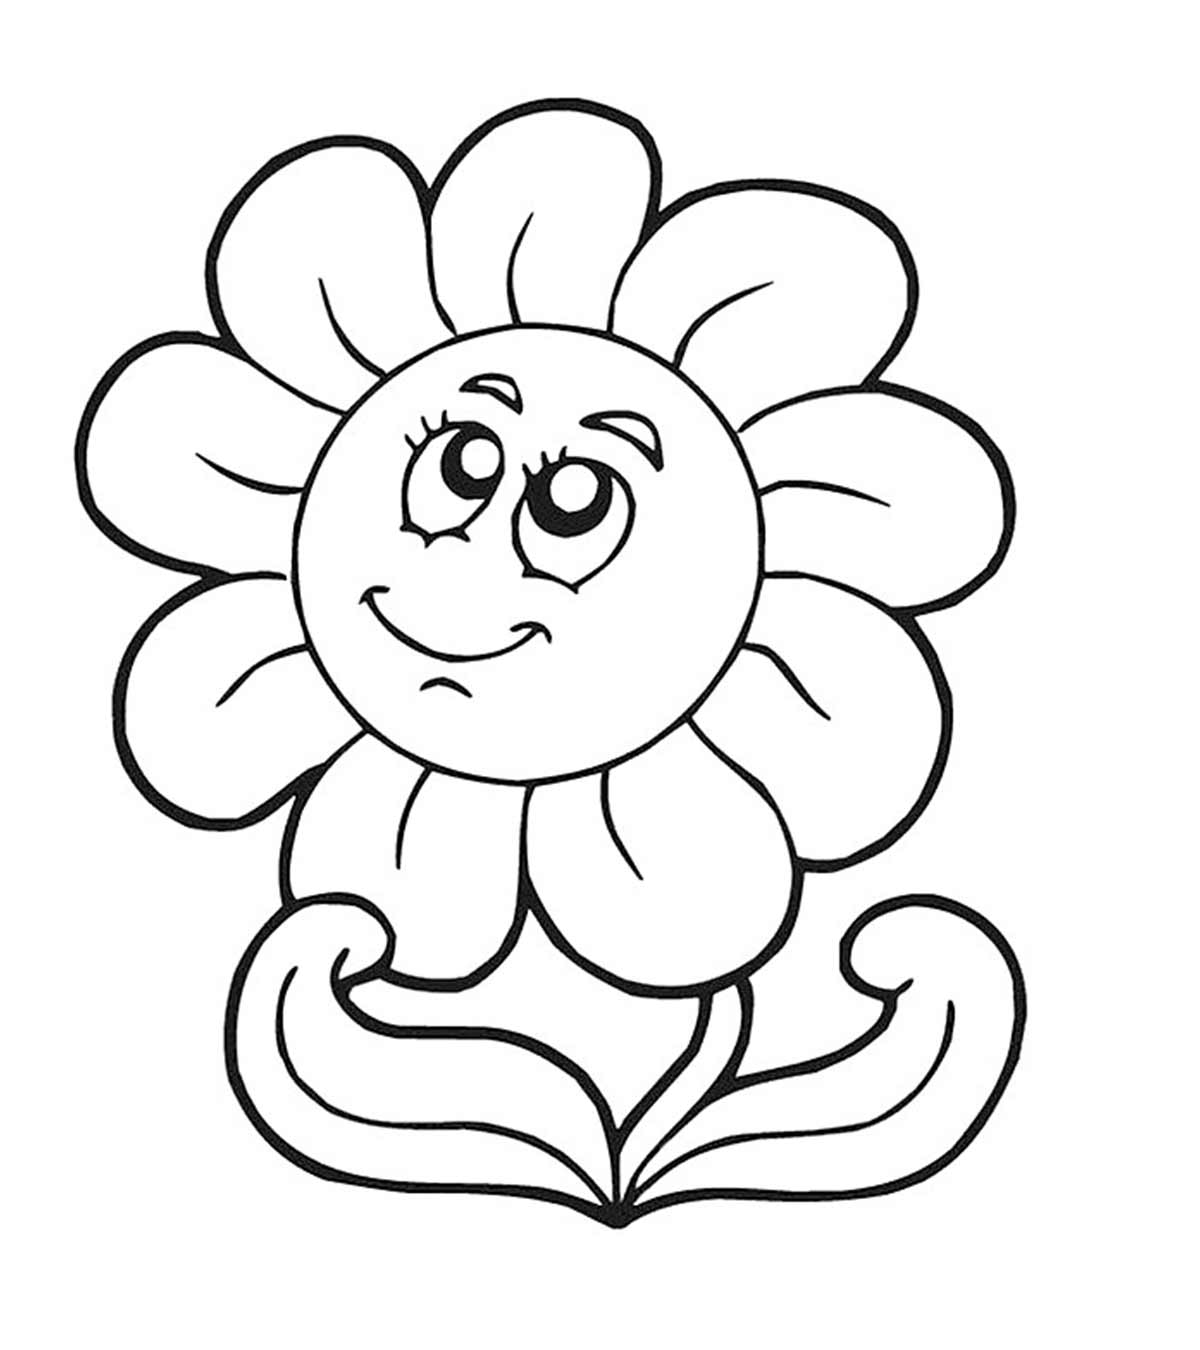 daisy flower garden coloring page